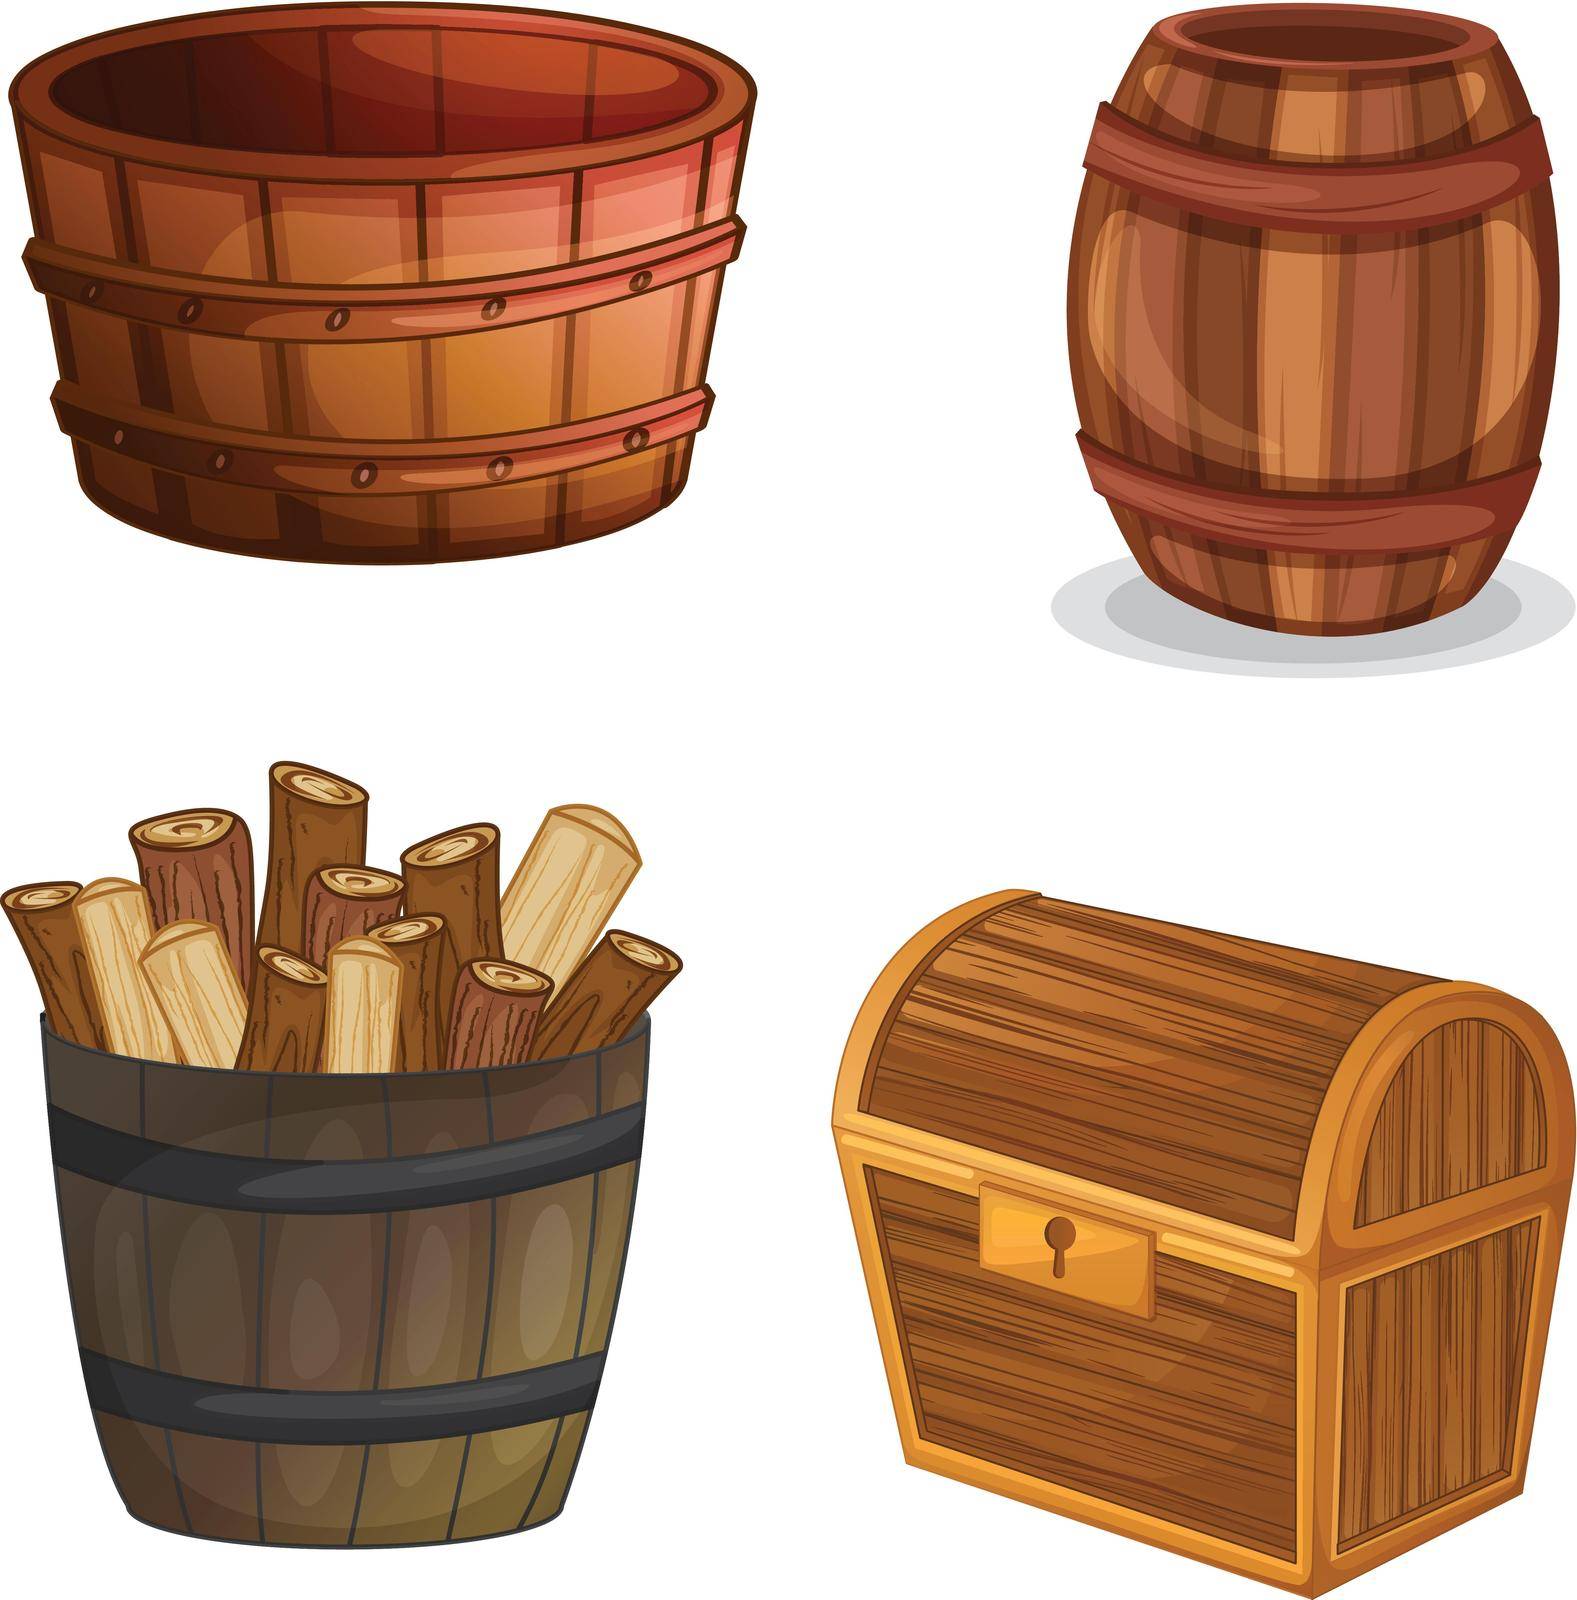 various wooden objects by iimages